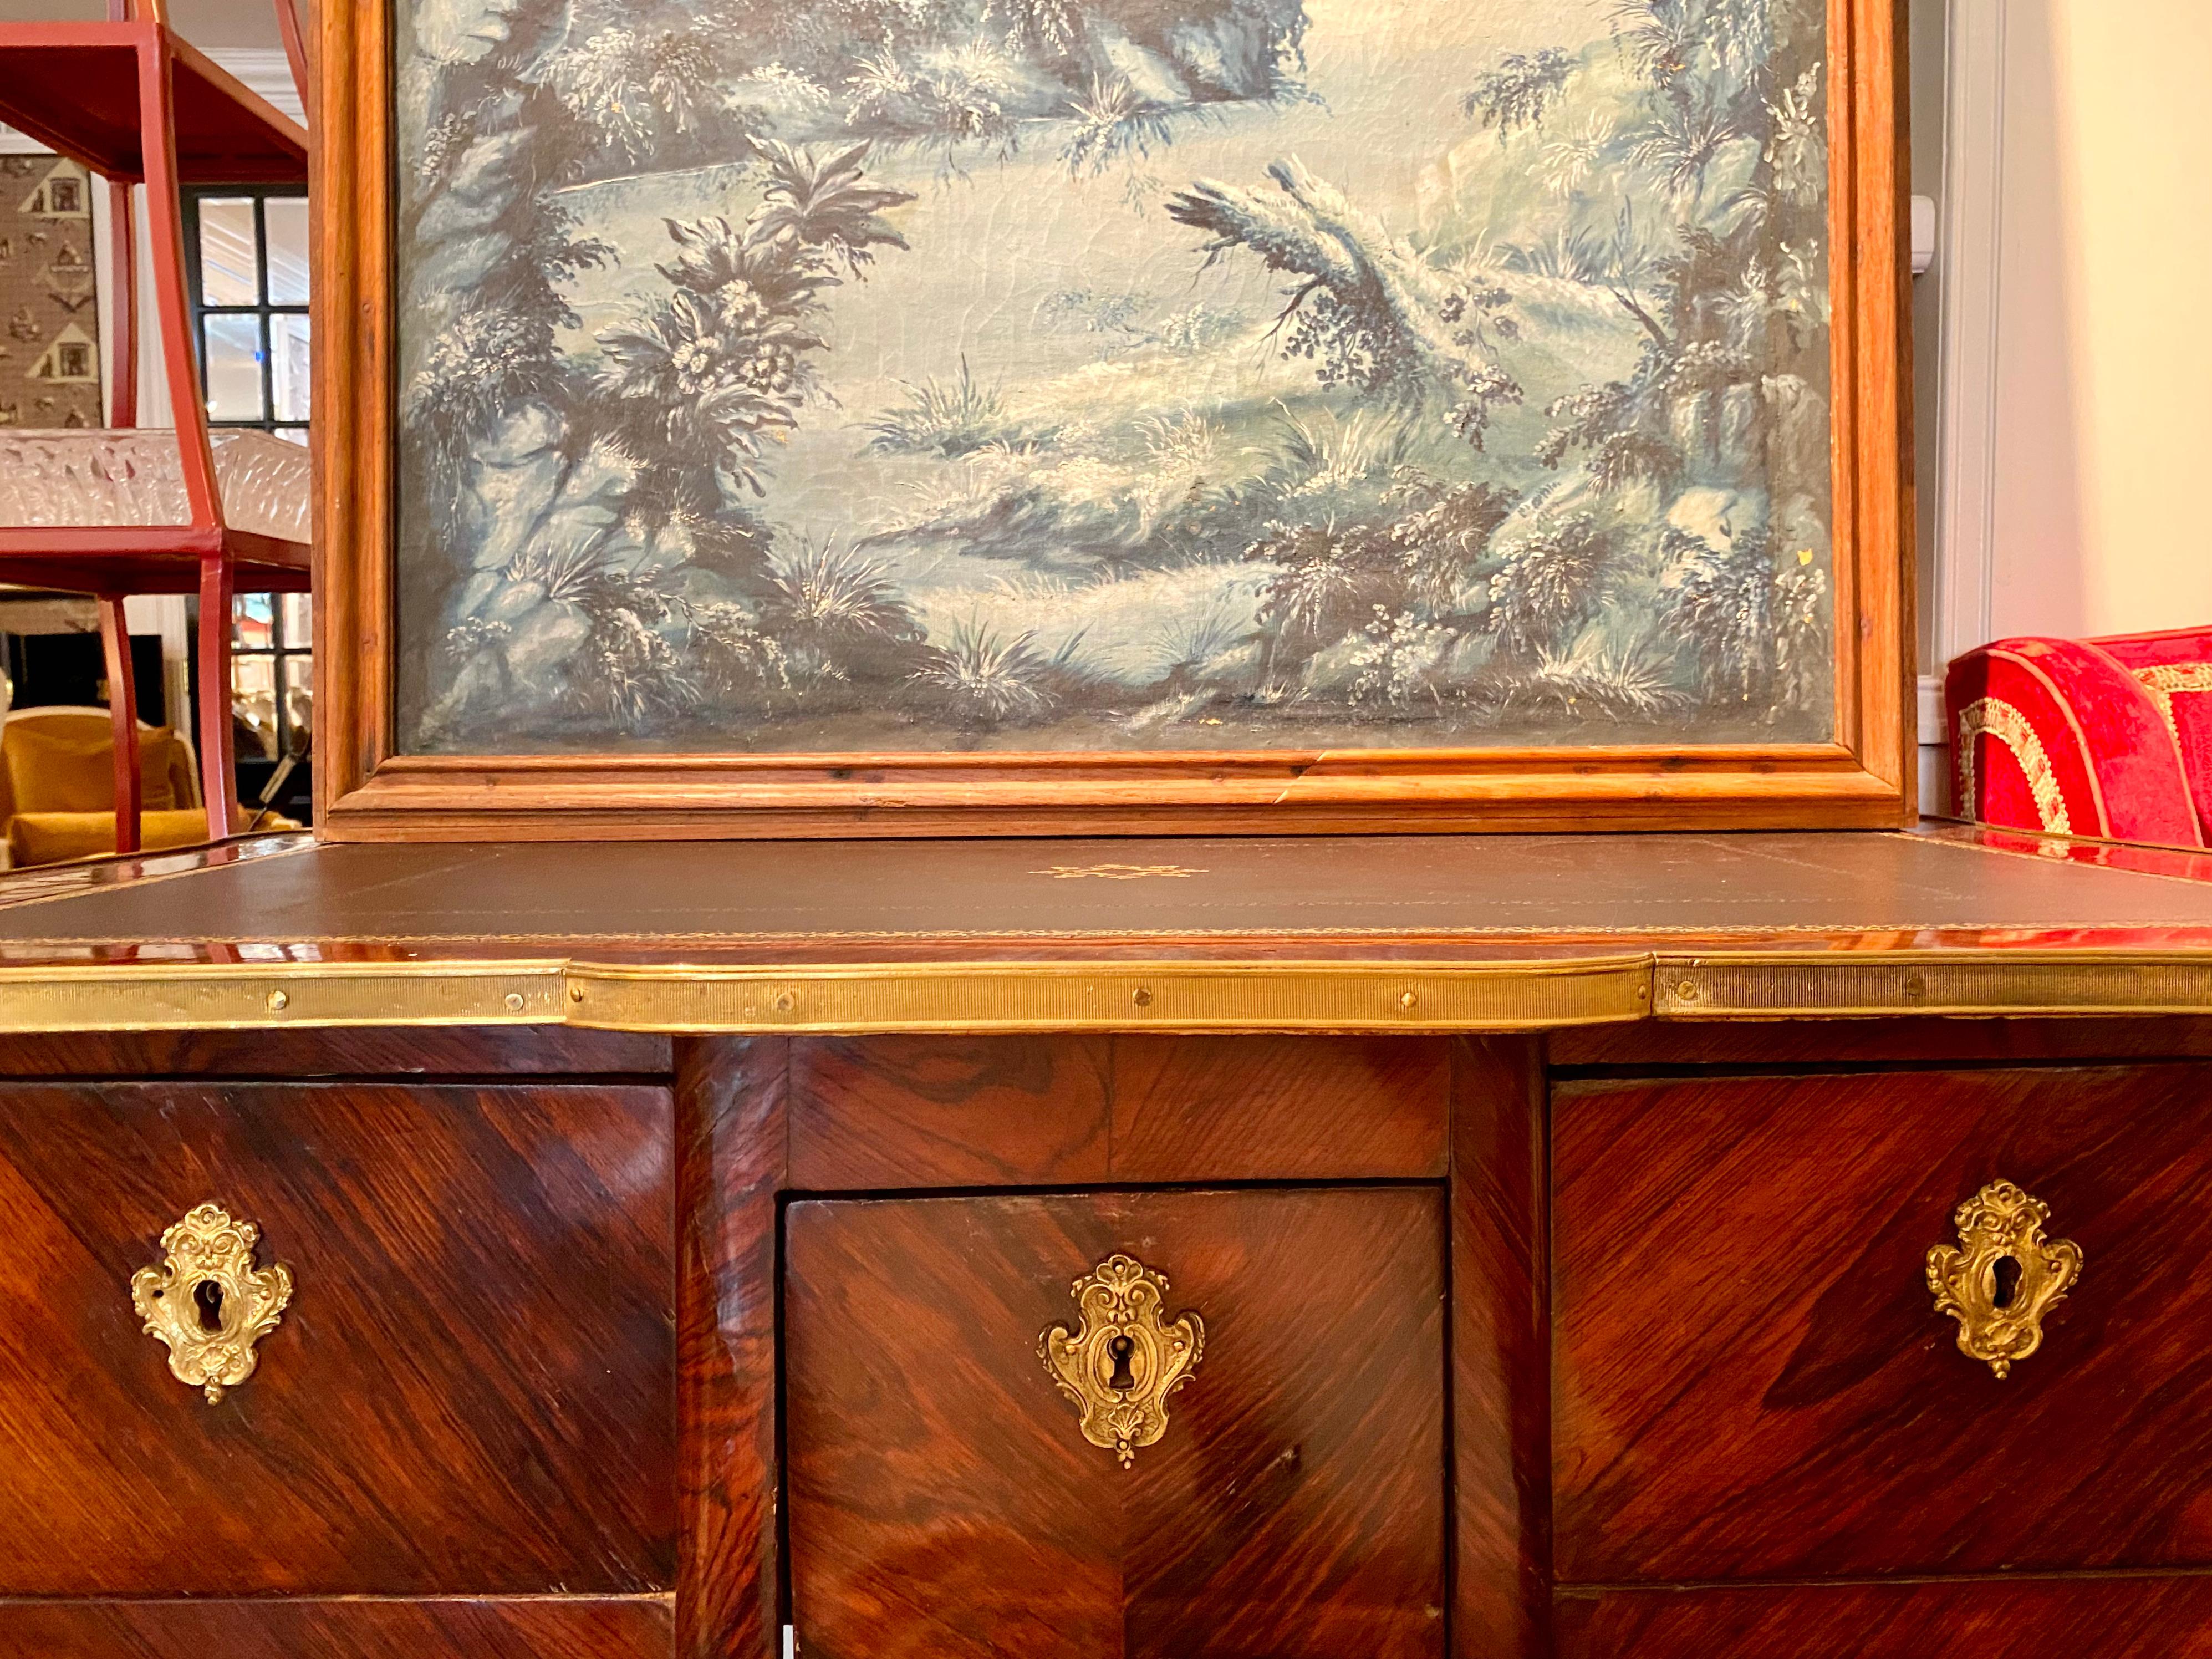 Painted French Large Camaïeu Bleu Grisaille Painting For Sale